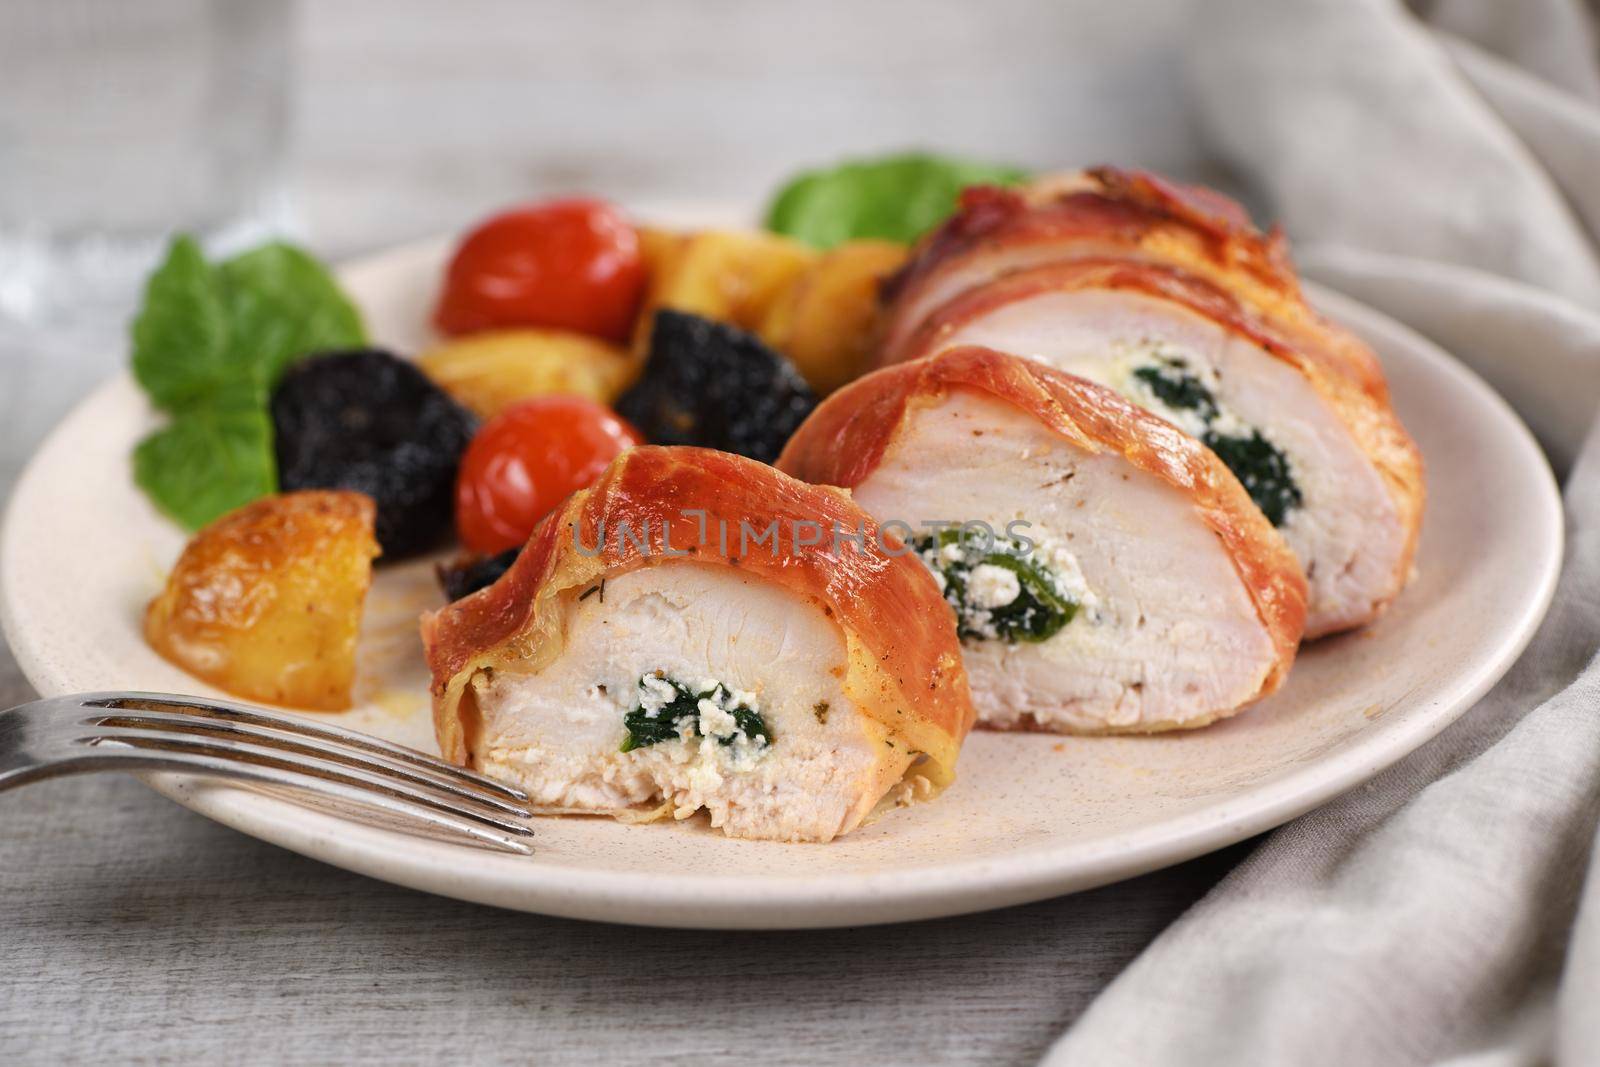 Sliced Stuffed Chicken Breast by Apolonia